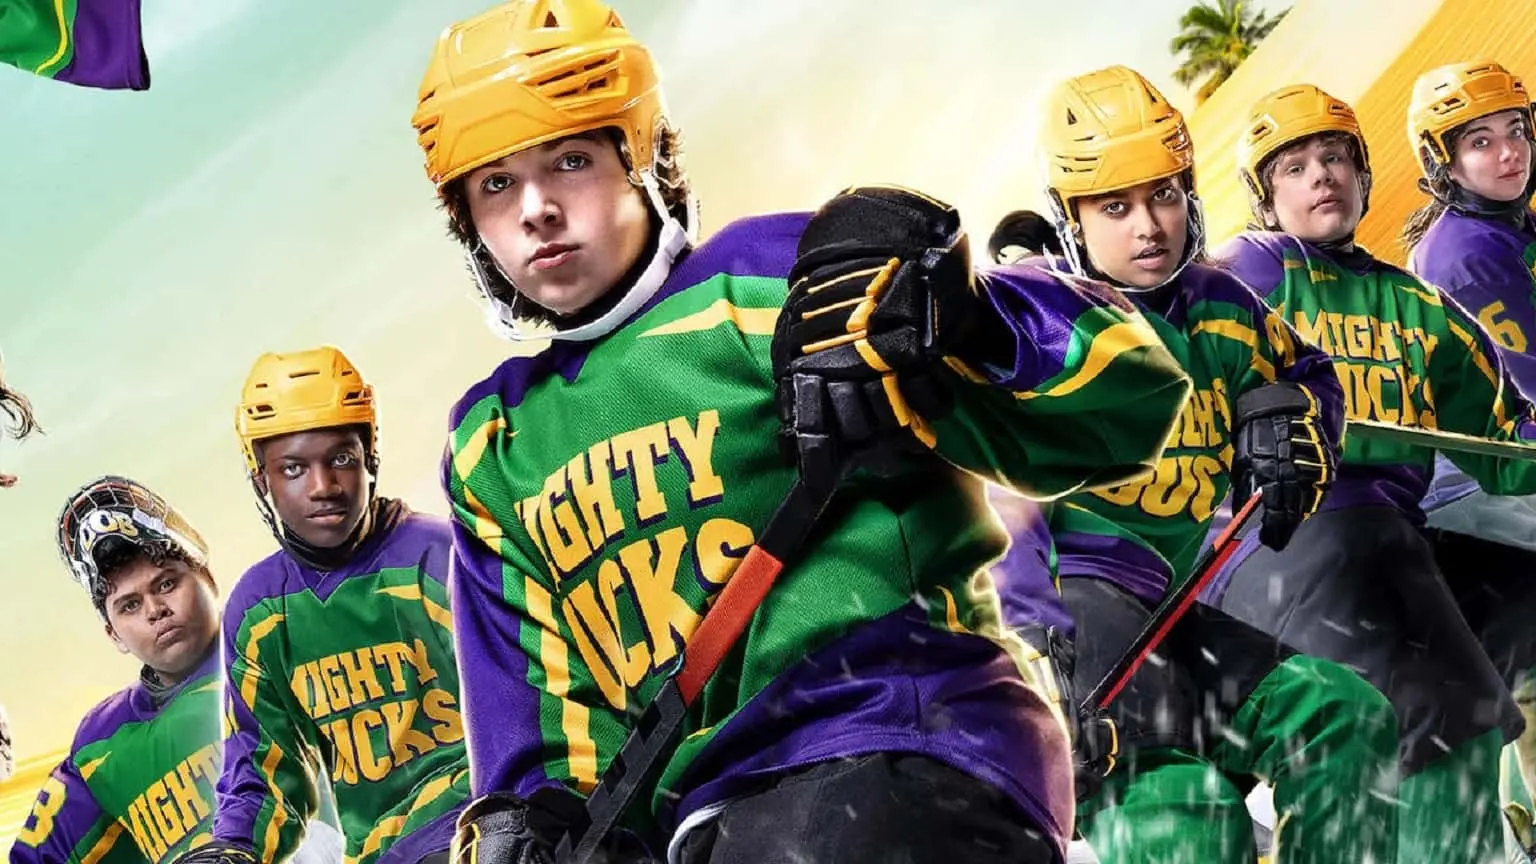 Gordon Bombay of 'The Mighty Ducks' Movies Featured in '30 for 30' Trailer  Internet Spoof (Video) 